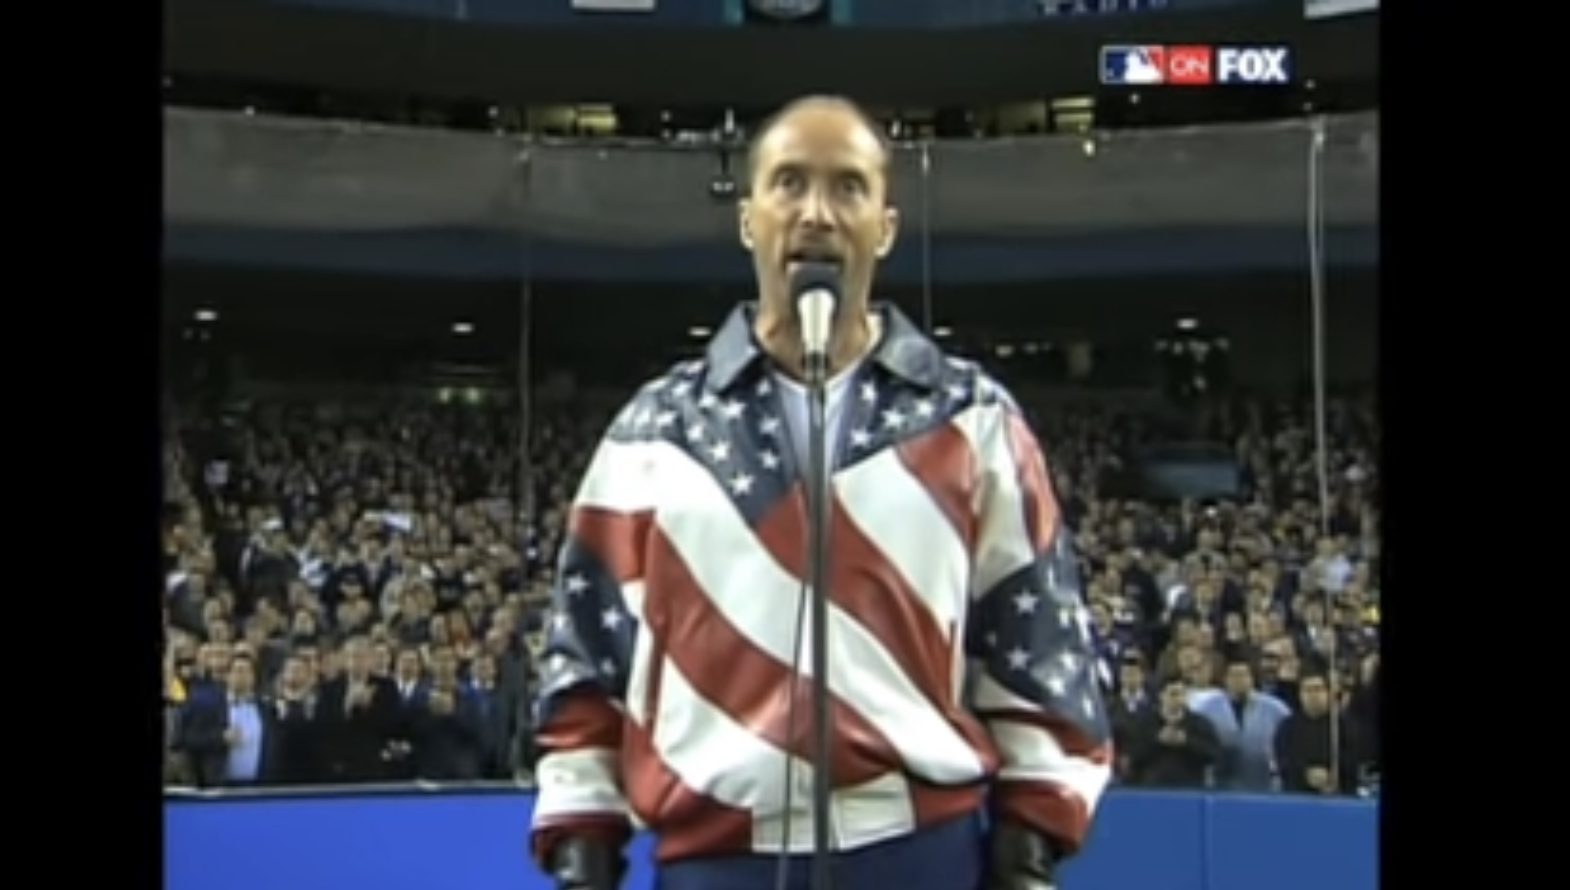 “That Weapon Killed Kids” – Lee Greenwood Pulls Out of NRA Convention Over Texas Shooting